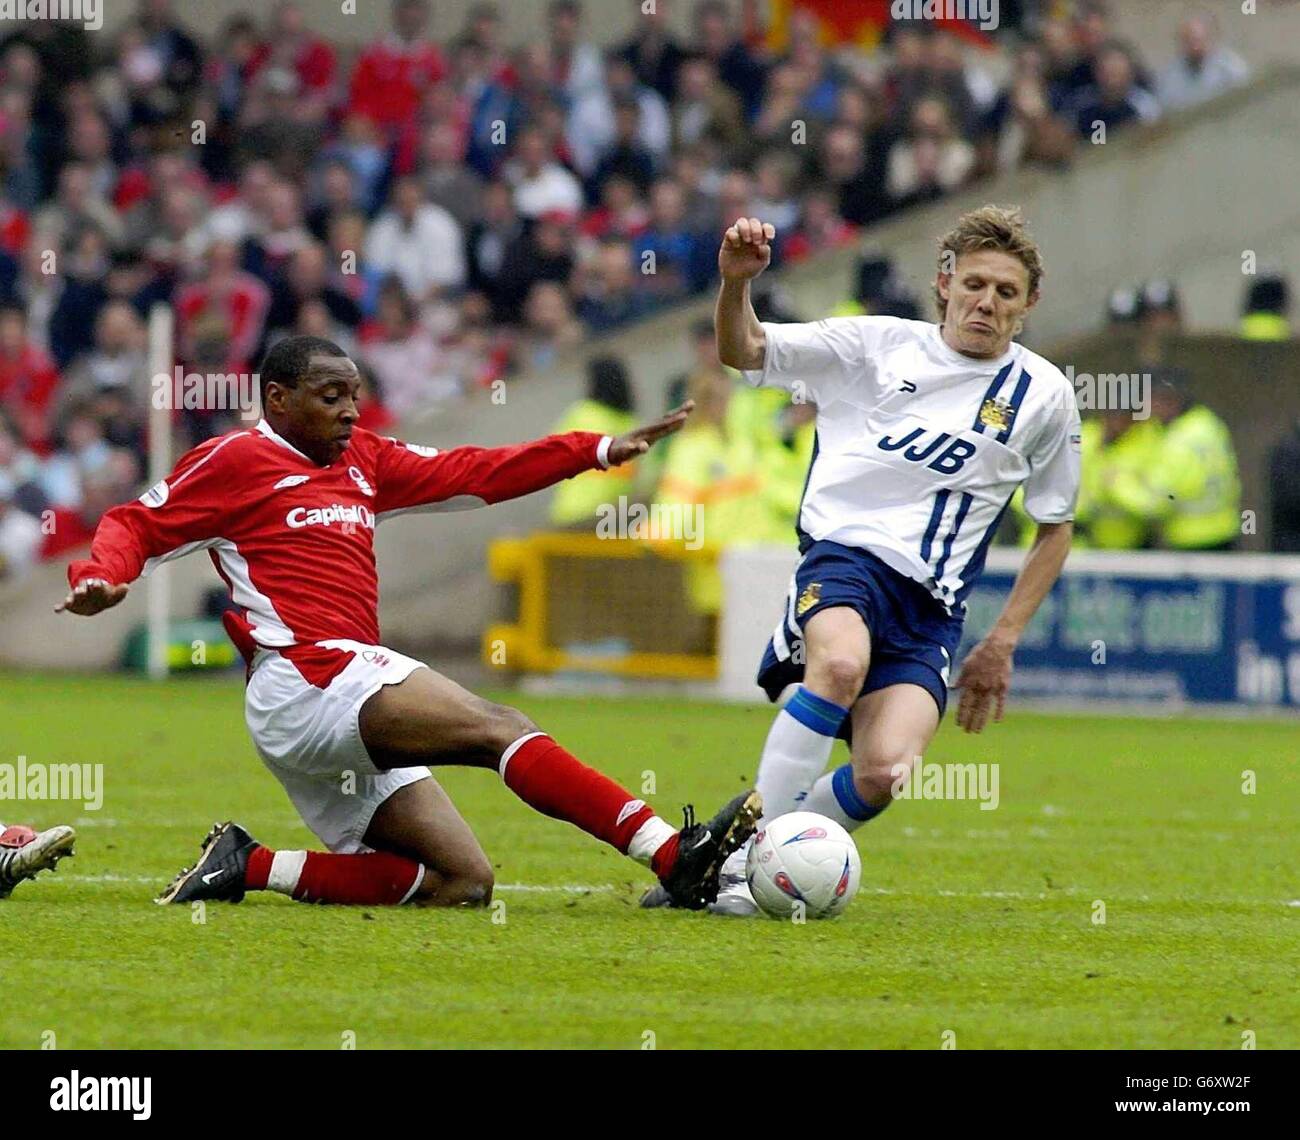 Nottingham Forest's Andy Impey (left) slides in for a tackle on Jimmy Bullard of Wigan, during the Nationwide Division One match at the City Ground, Nottingham. . Stock Photo